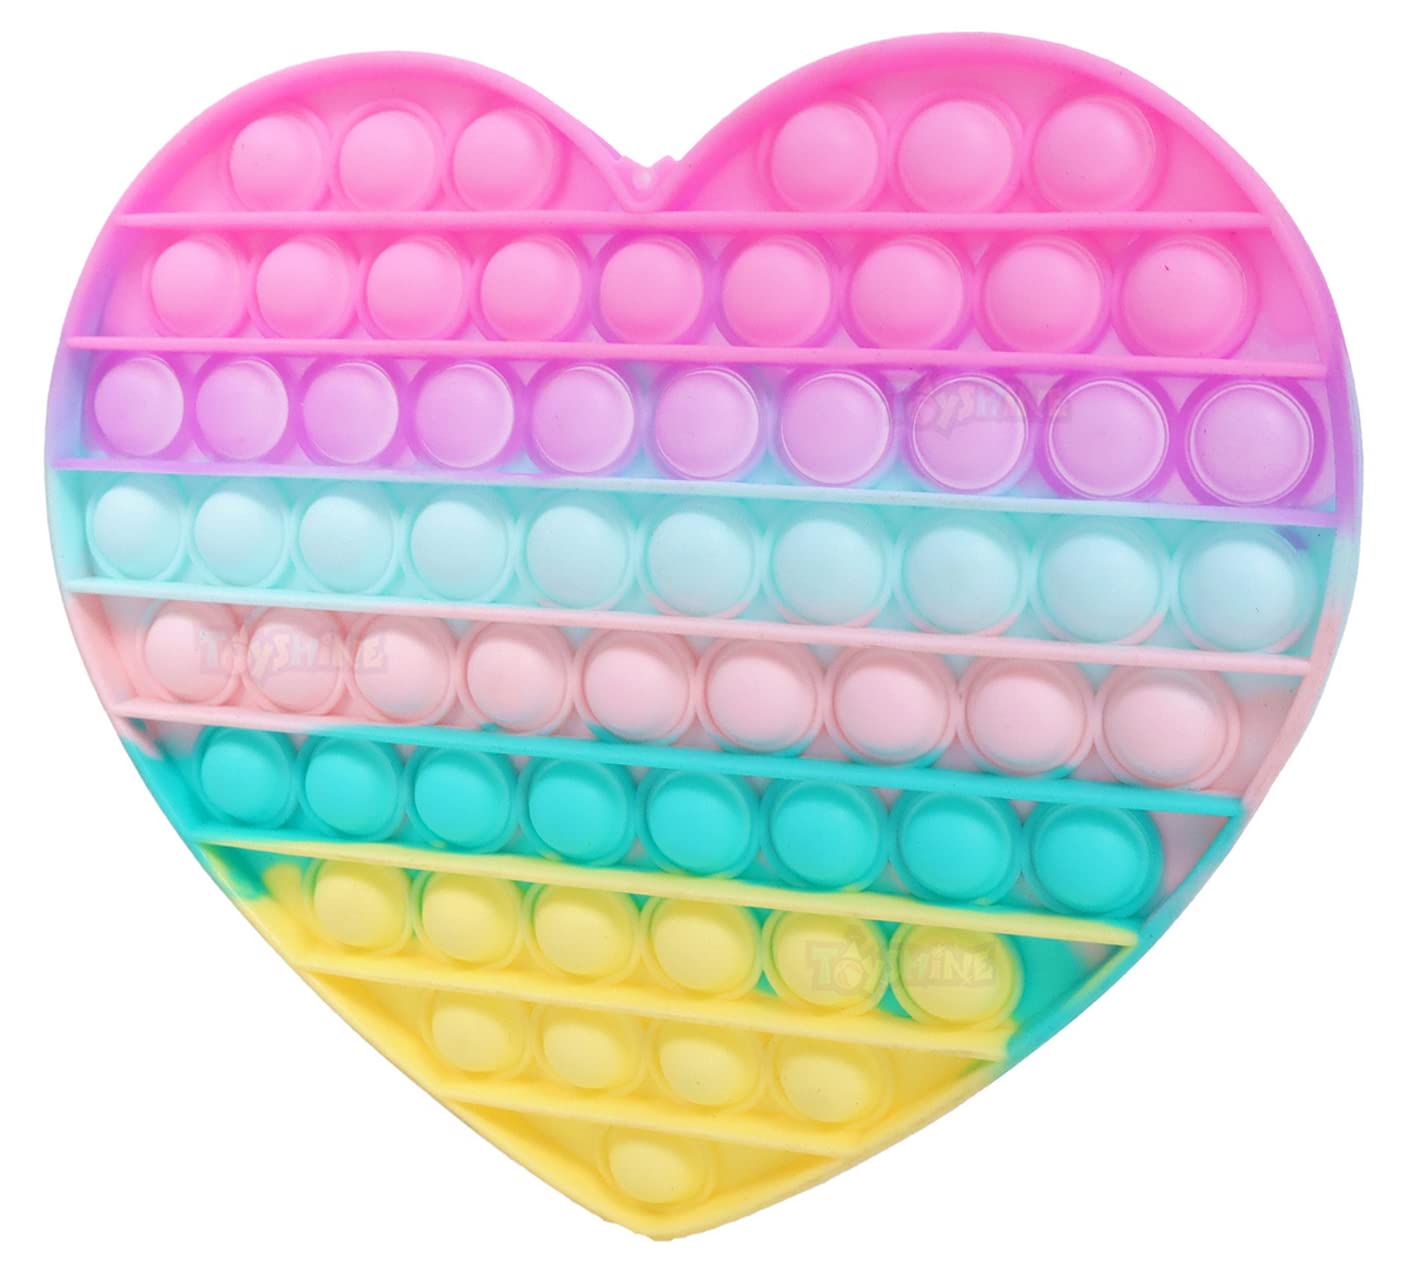 Big Heart 82 Bubbles Pop it Popping Sounds Toy, Push Bubbles for Autism Stress Reliever Cykapu